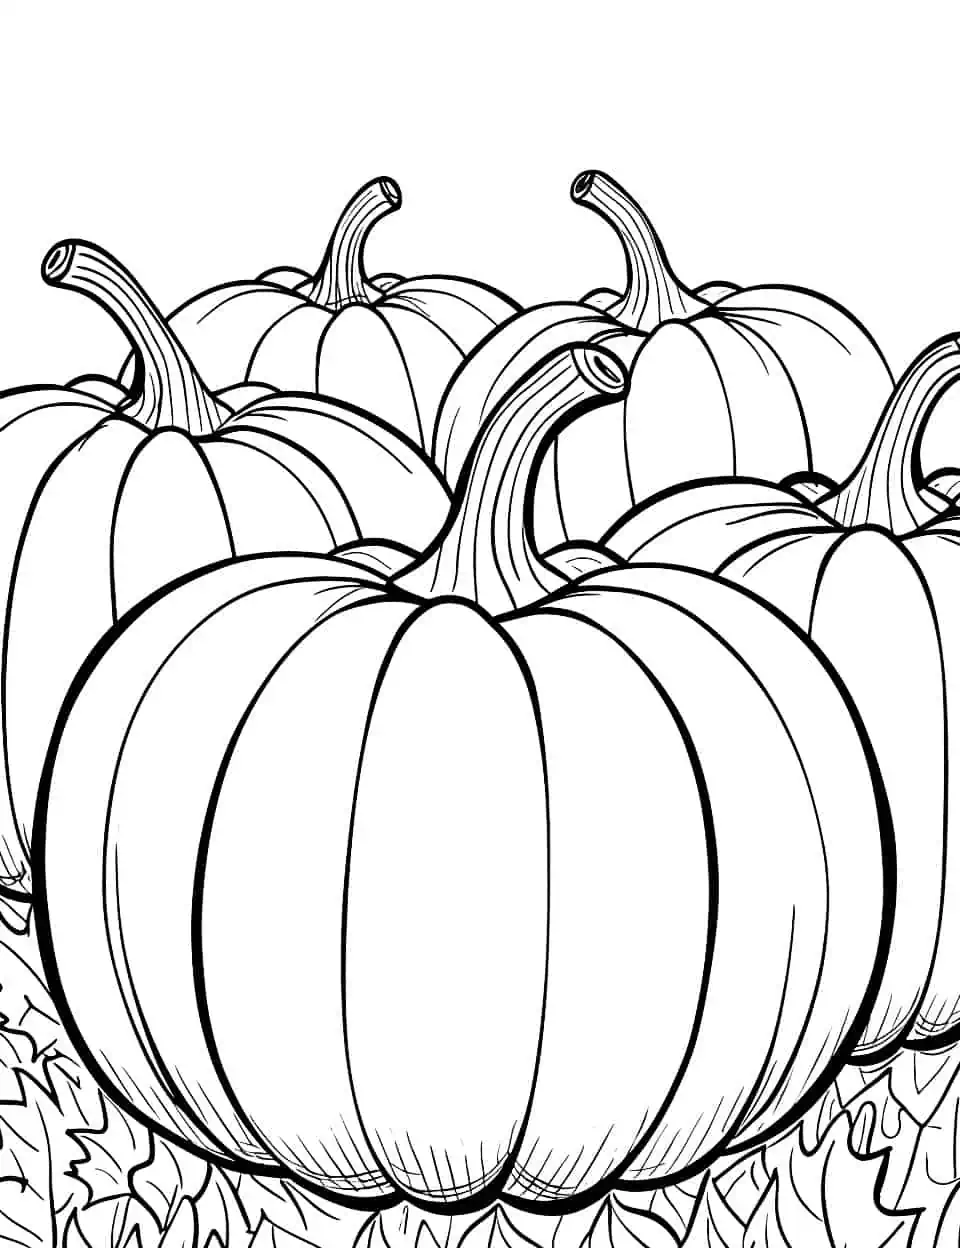 Plain Pumpkin Patch Coloring Page - A collection of plain pumpkins in a patch, waiting for their vibrant colors to be filled in.